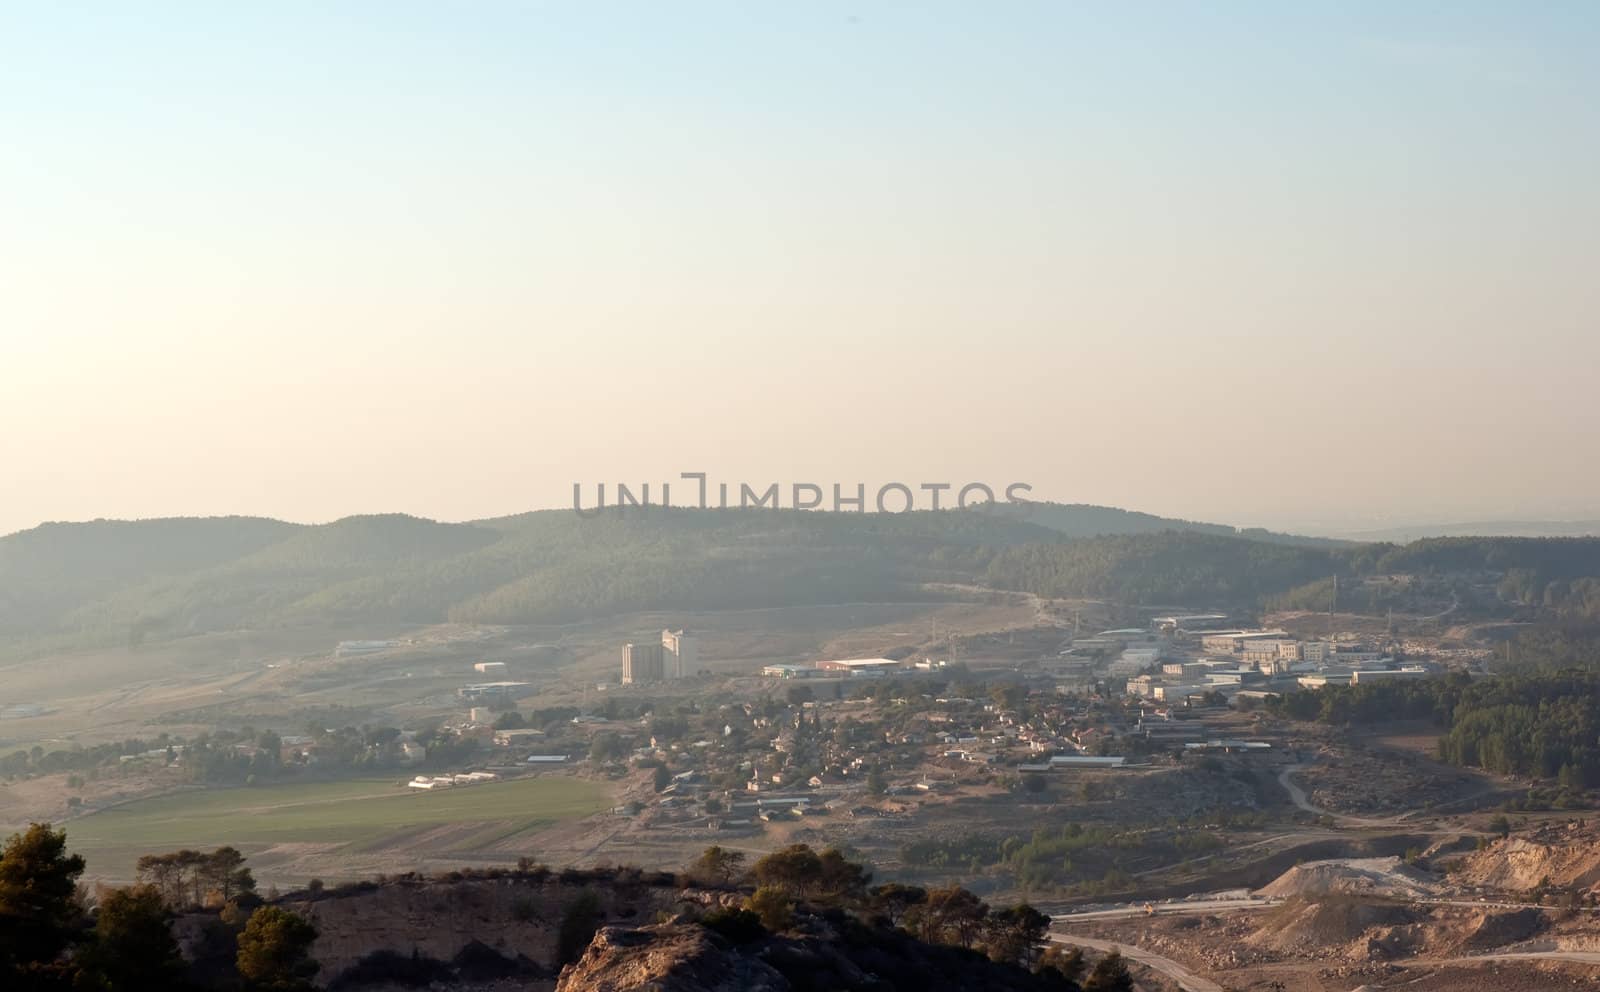 View of the forest in Israel. Beit Shemesh.